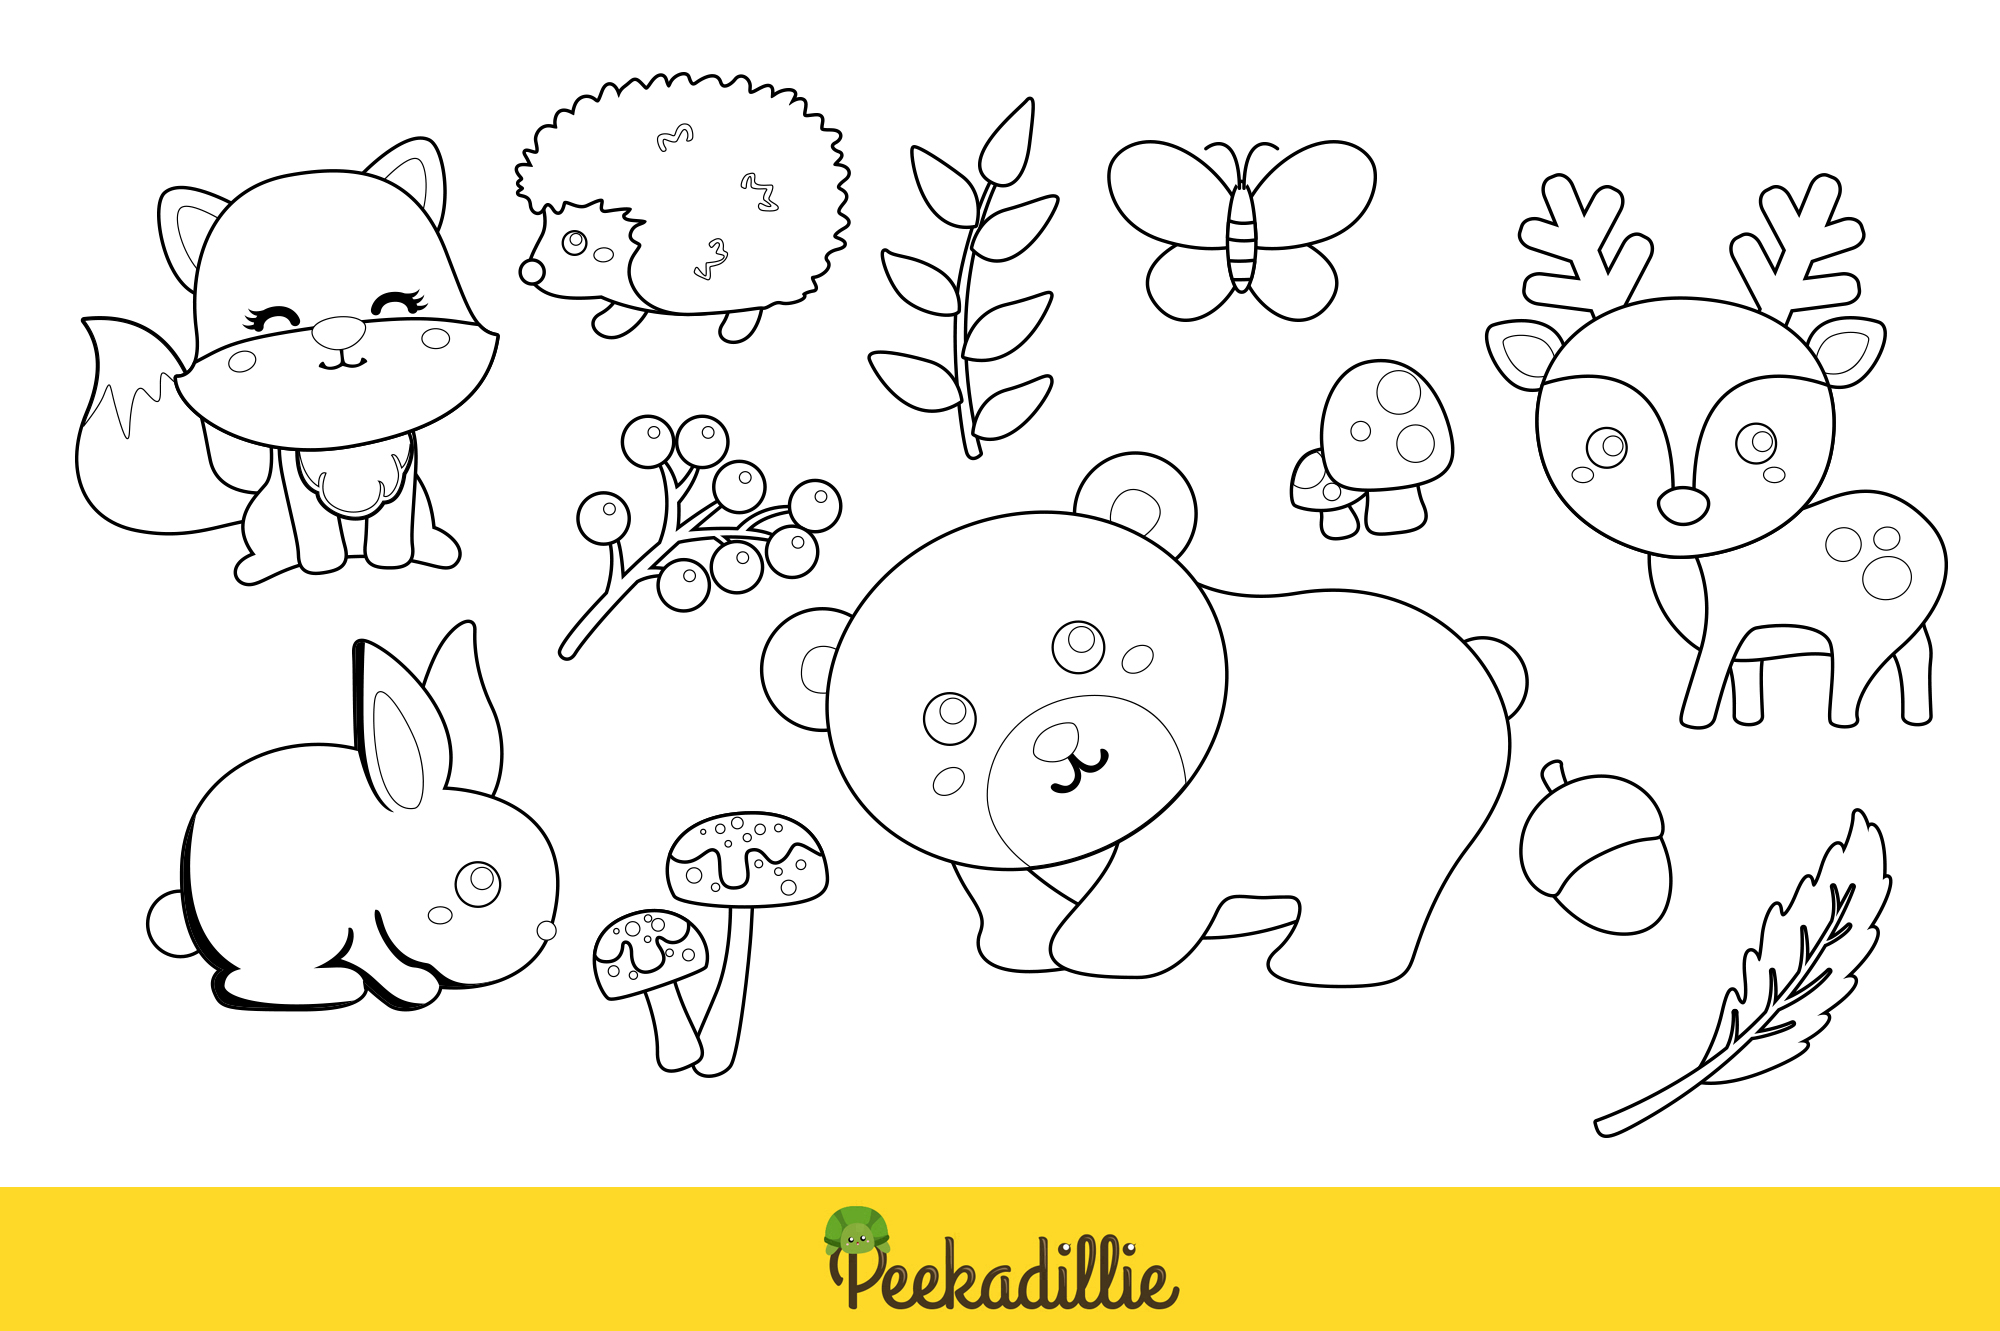 Coloring page with animals and plants.